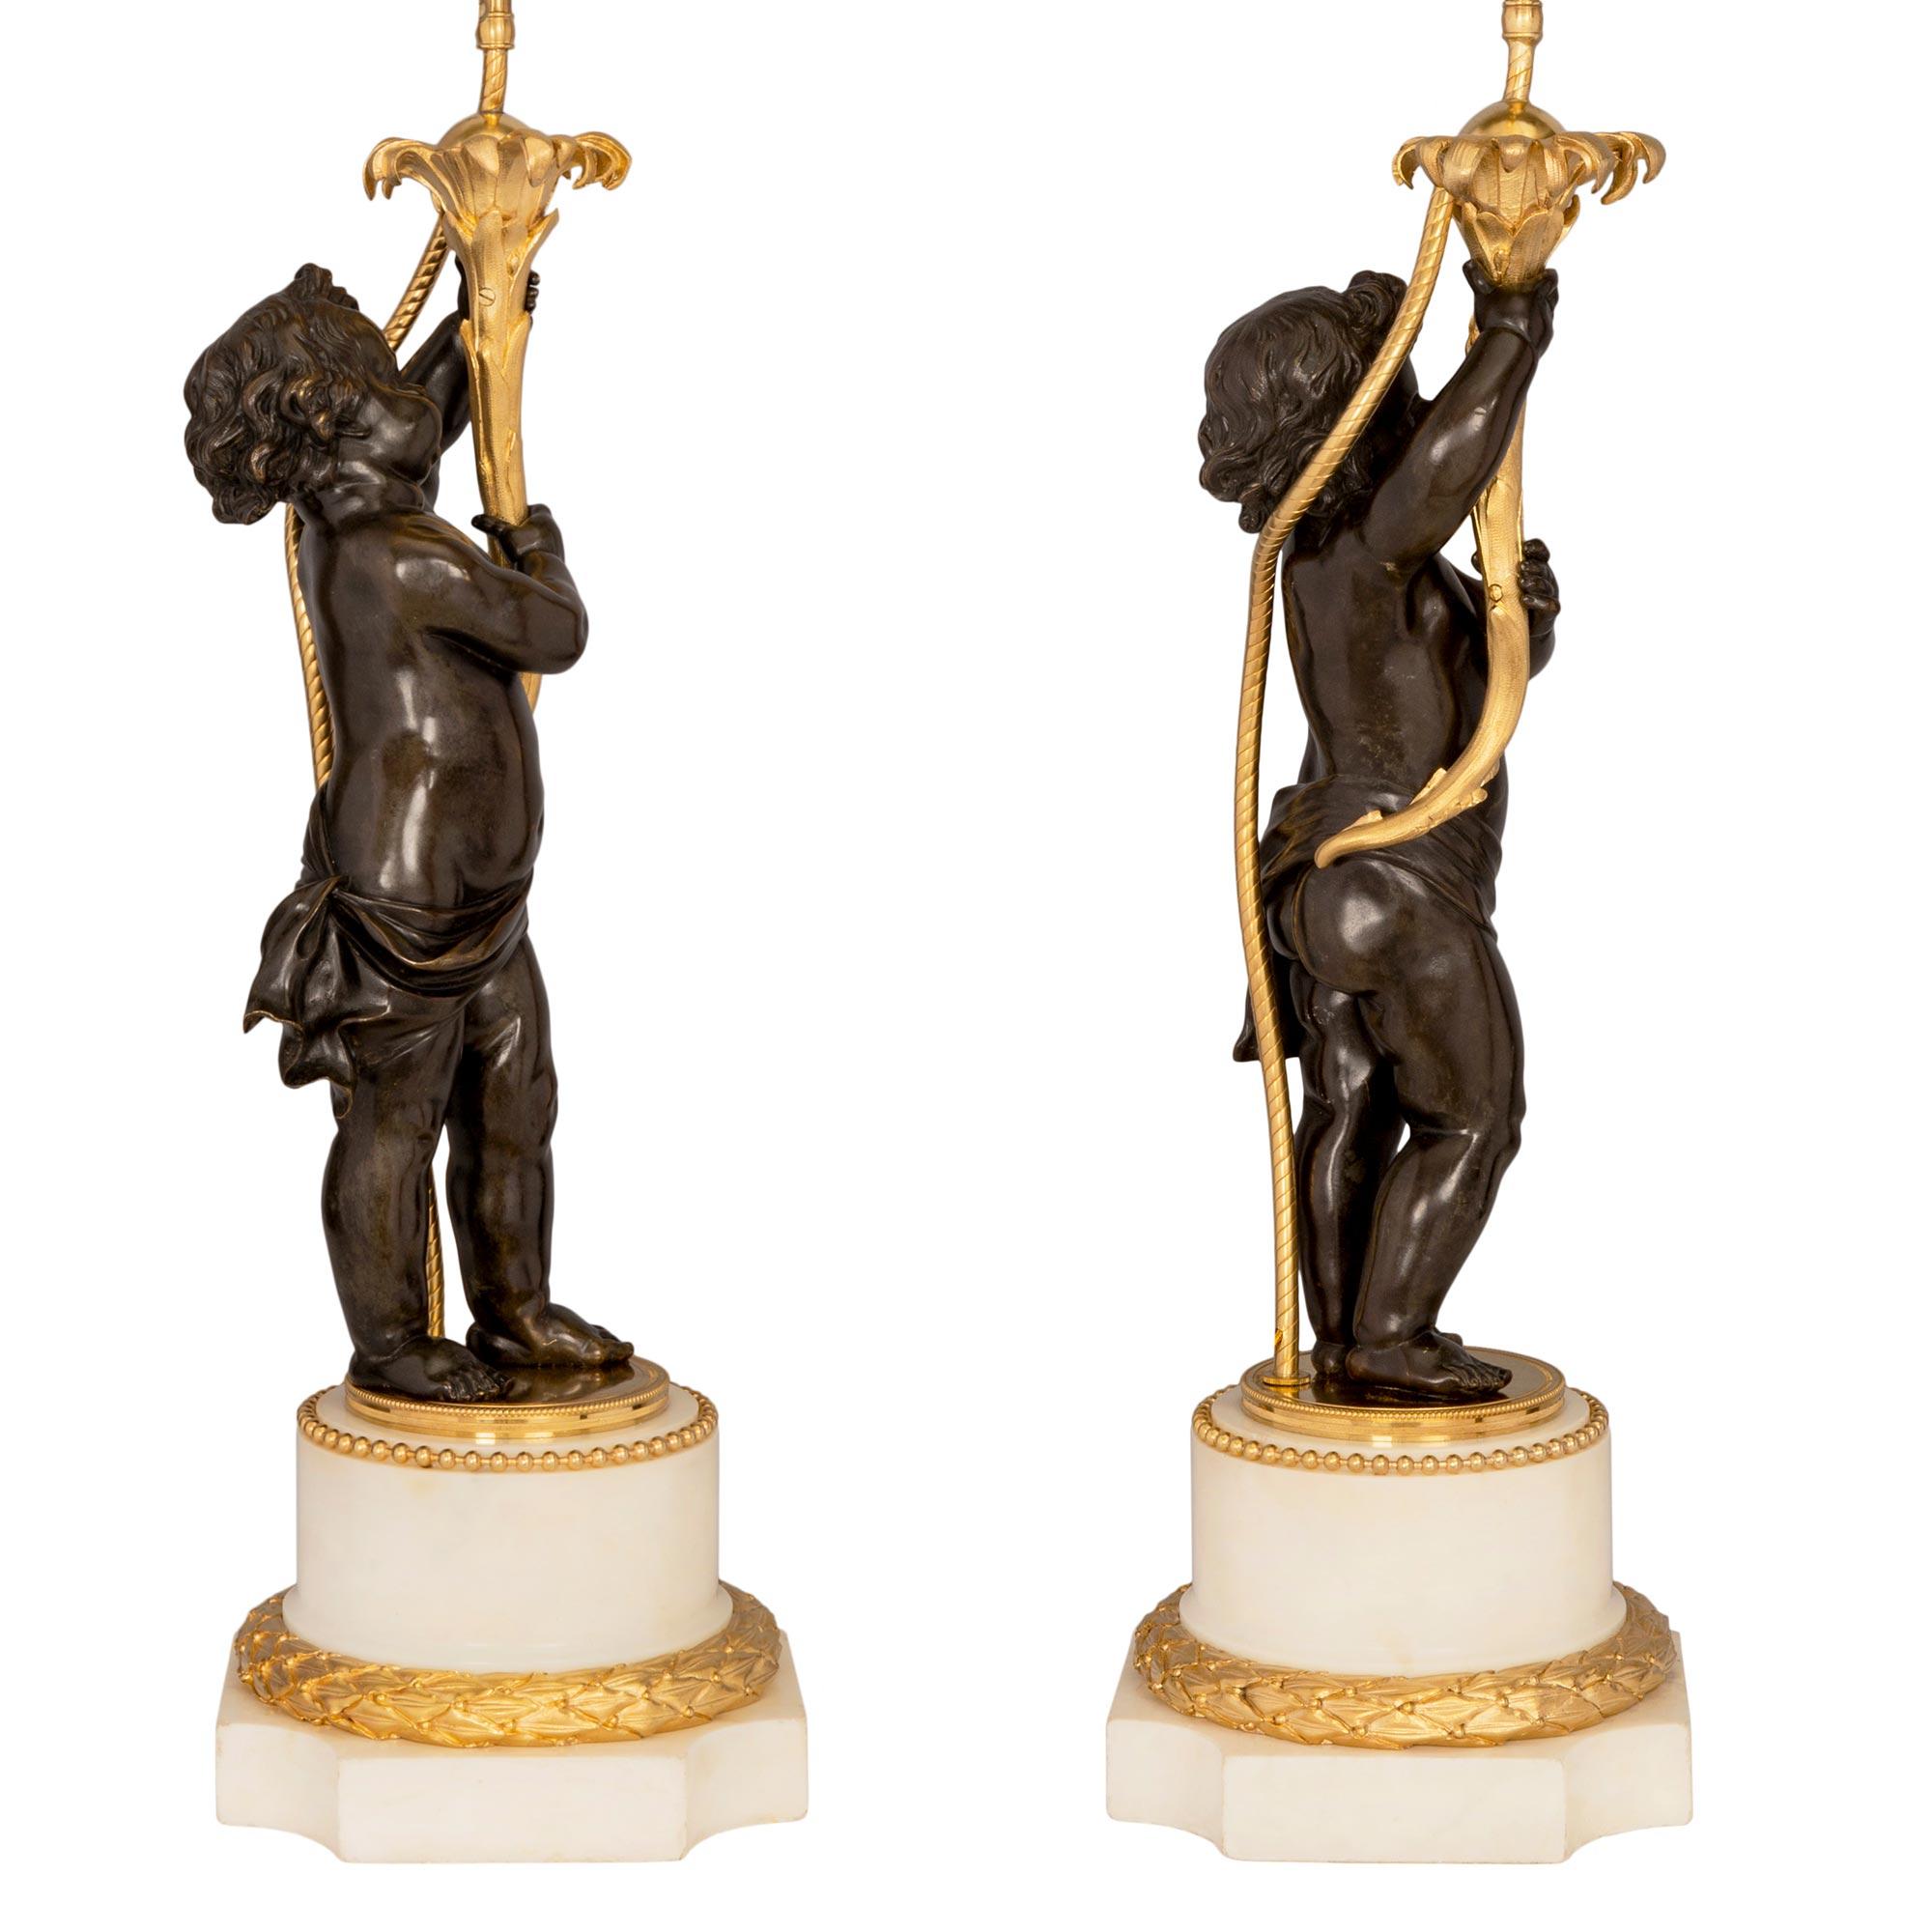 A most elegant and high quality true pair of French 19th century Louis XVI style patinated bronze, ormolu and white Carrara marble lamps. Each lamp is raised by a square base with concave corners and a striking berried laurel wraparound ormolu band.